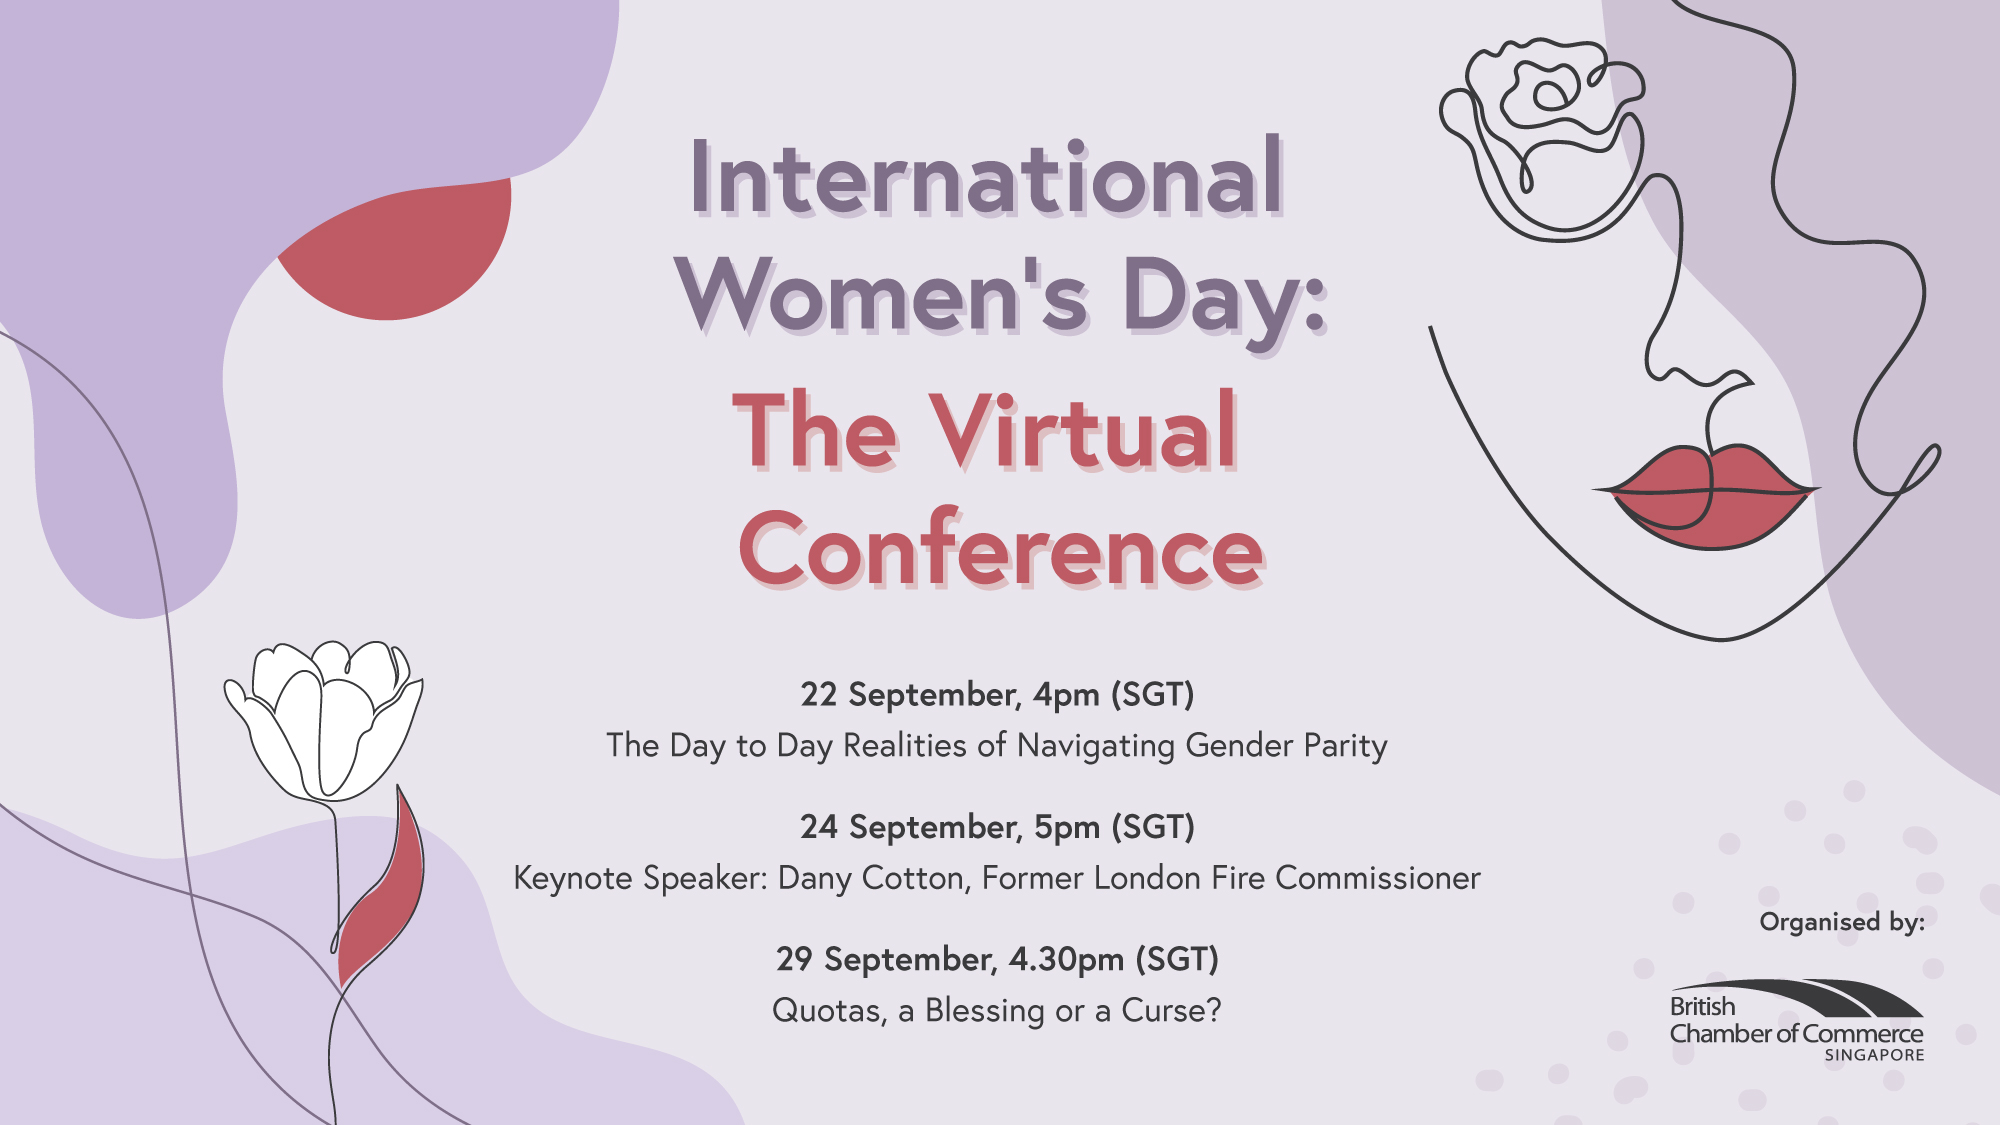 International Women's Day 2020 - The Virtual Conference